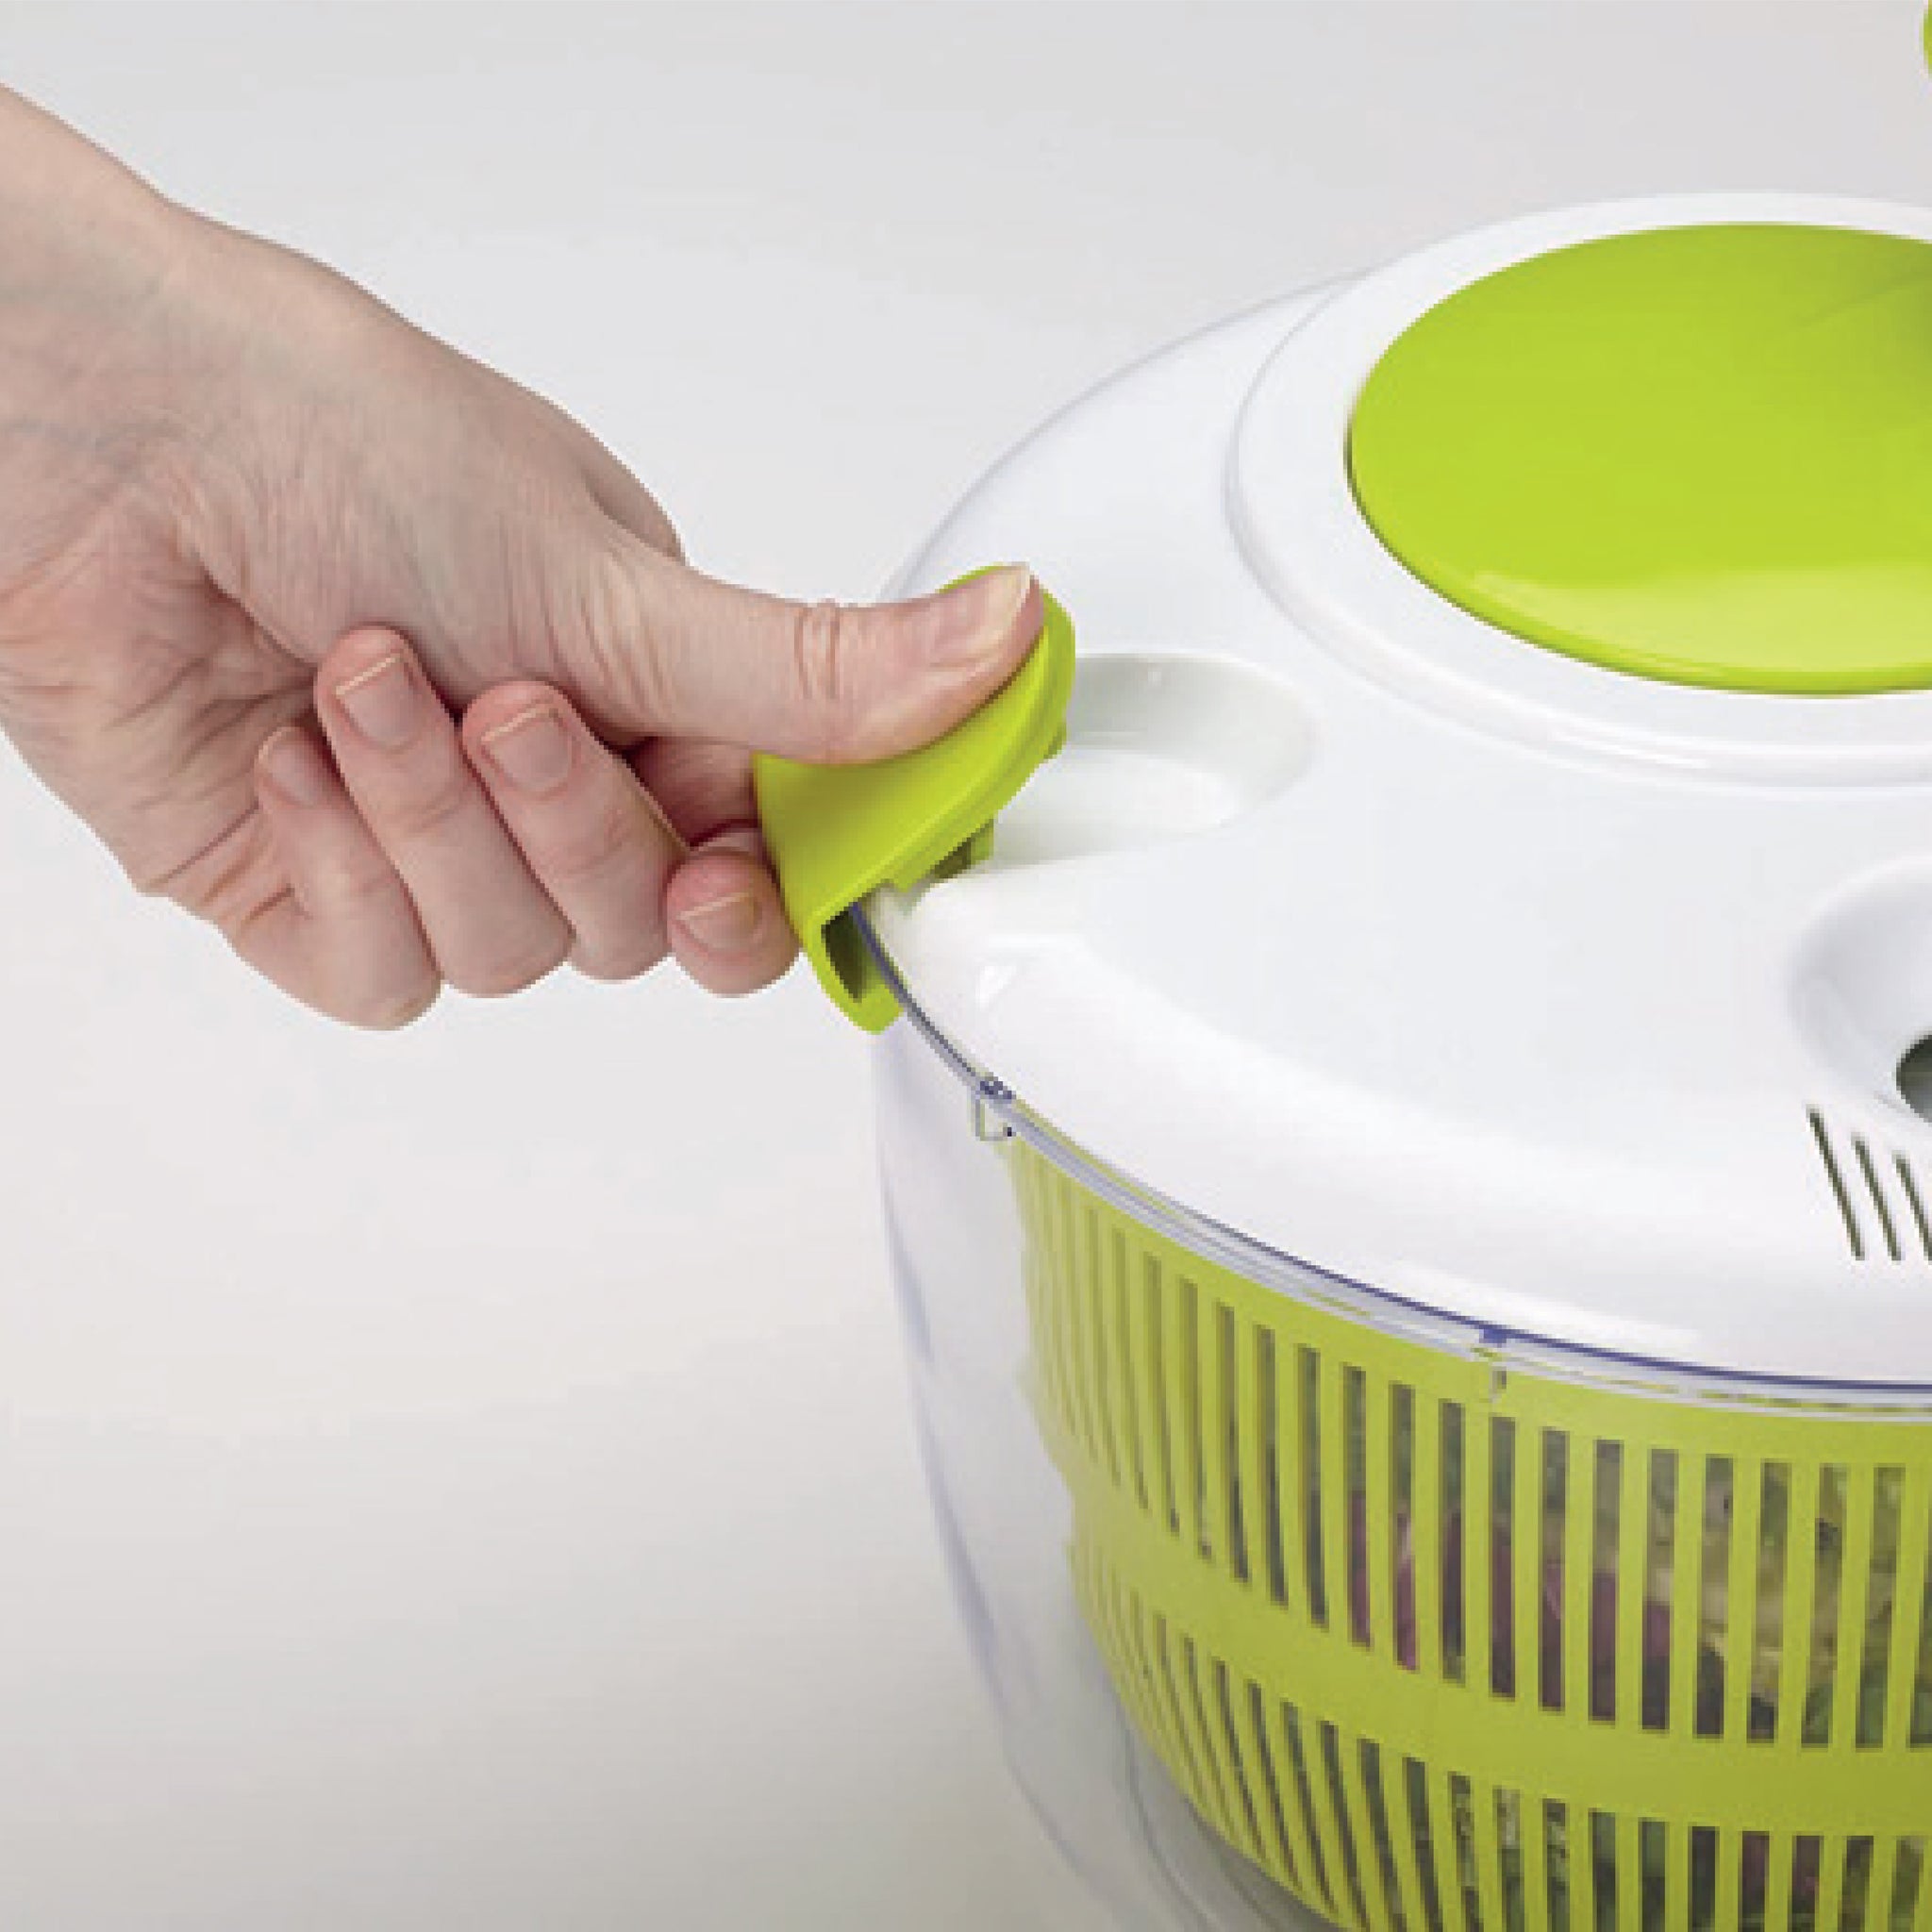 KitchenCraft Healthy Eating Salad Spinner